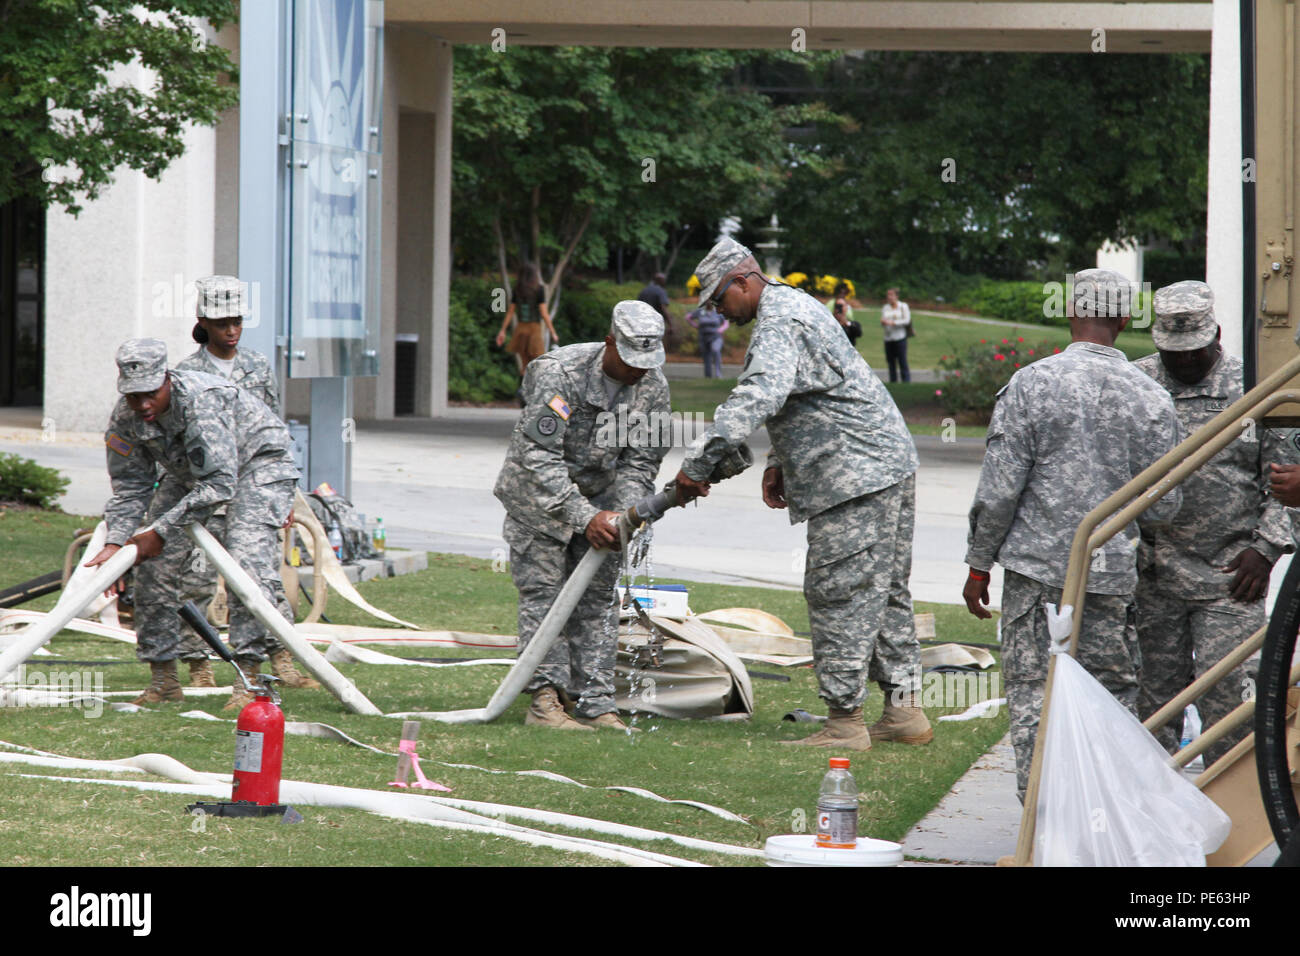 South Carolina National Guard Soldiers from the 741st Quartermaster Battalion drag hoses around the grounds of Richland Memorial Hospital that will connect to water treatment equipment, Oct. 8. The 741st Quartermaster Battalion and 218th Brigade Support Battalion worked together to purify water for the hospital since most of Columbia was under a boil-water advisory. Guardsmen have been assisting in a variety of ways throughout the state after the worst rains and flooding in recorded history. The South Carolina National Guard was on call before the storms hit and continued to provide support to Stock Photo